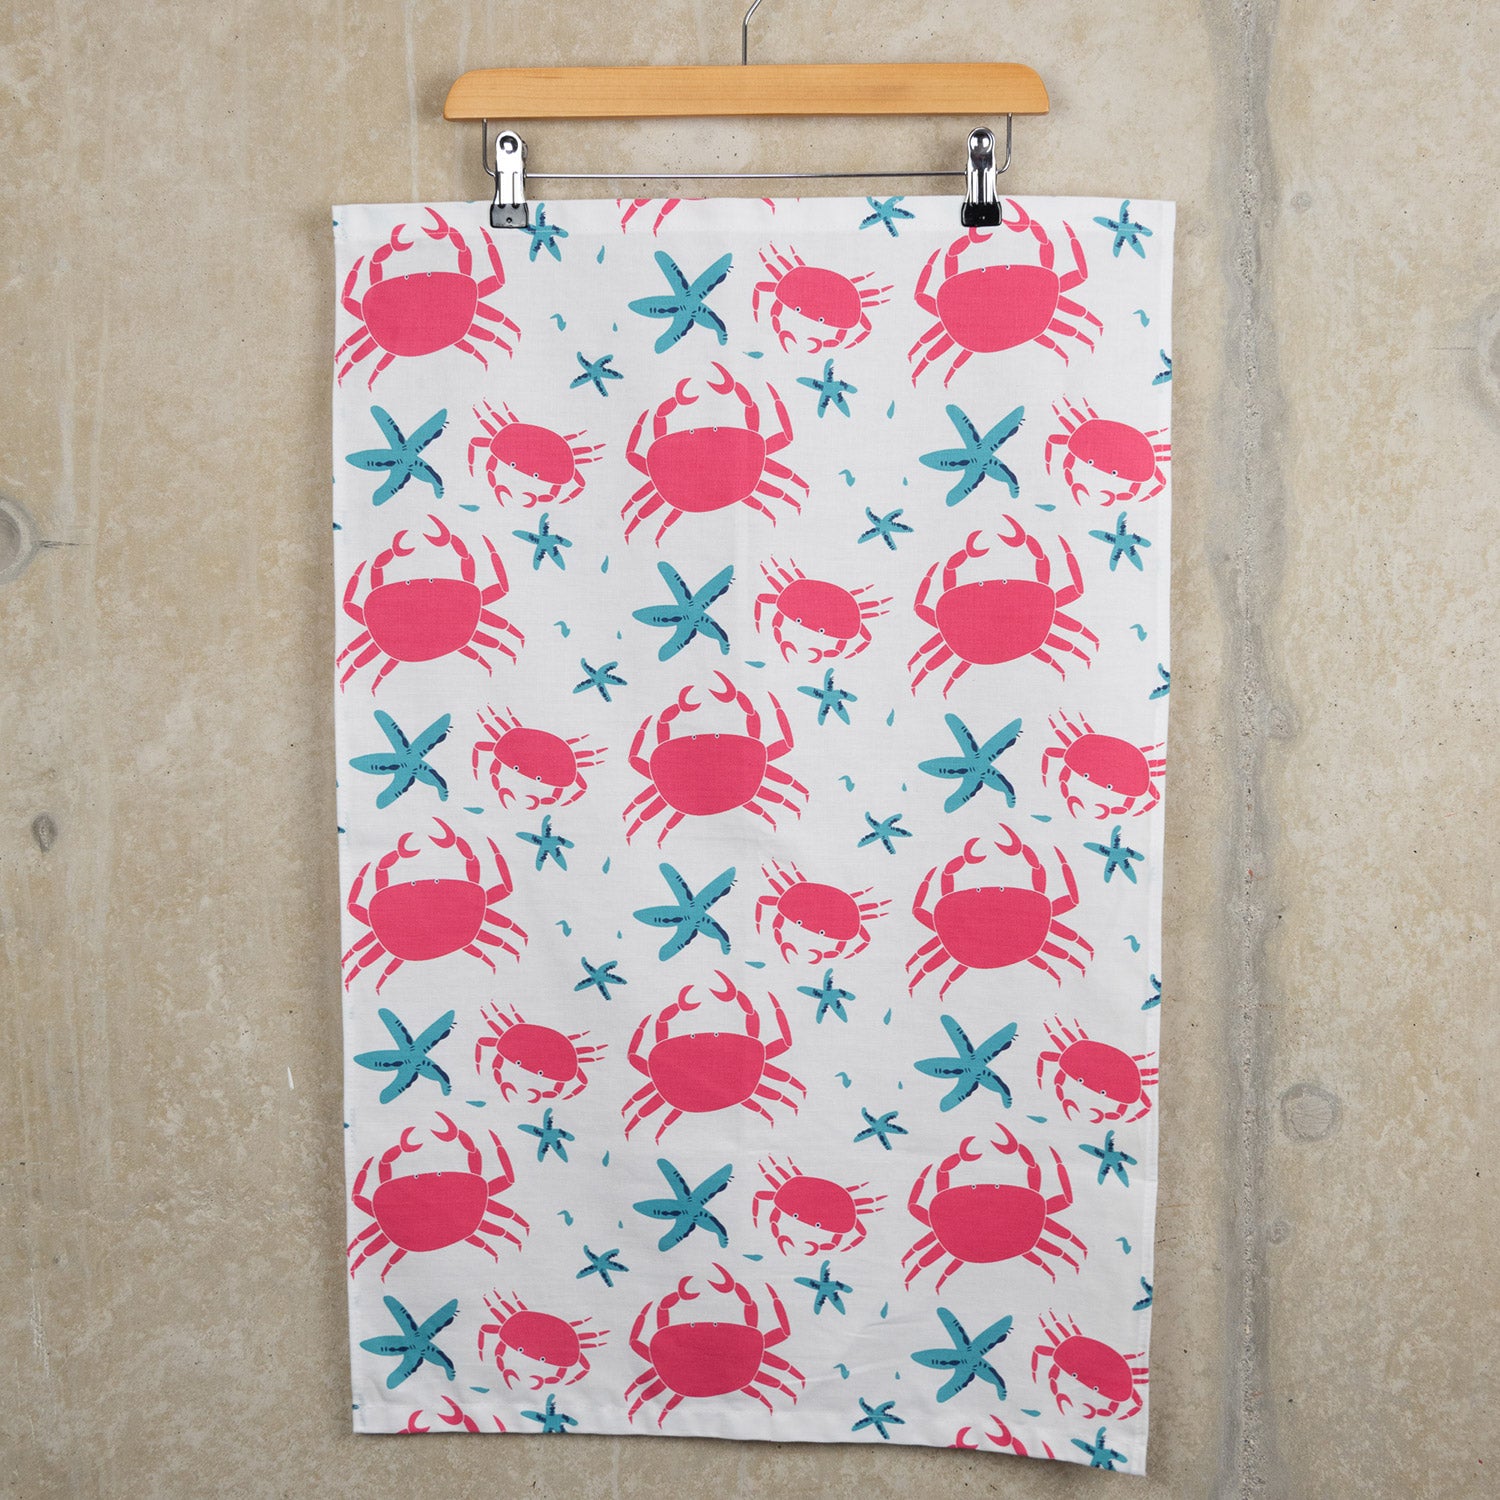 The crab and starfish tea towel features pink crabs and blue starfish on a light cream background. The tea towel is hanging from a clip hanger against a light grey background.